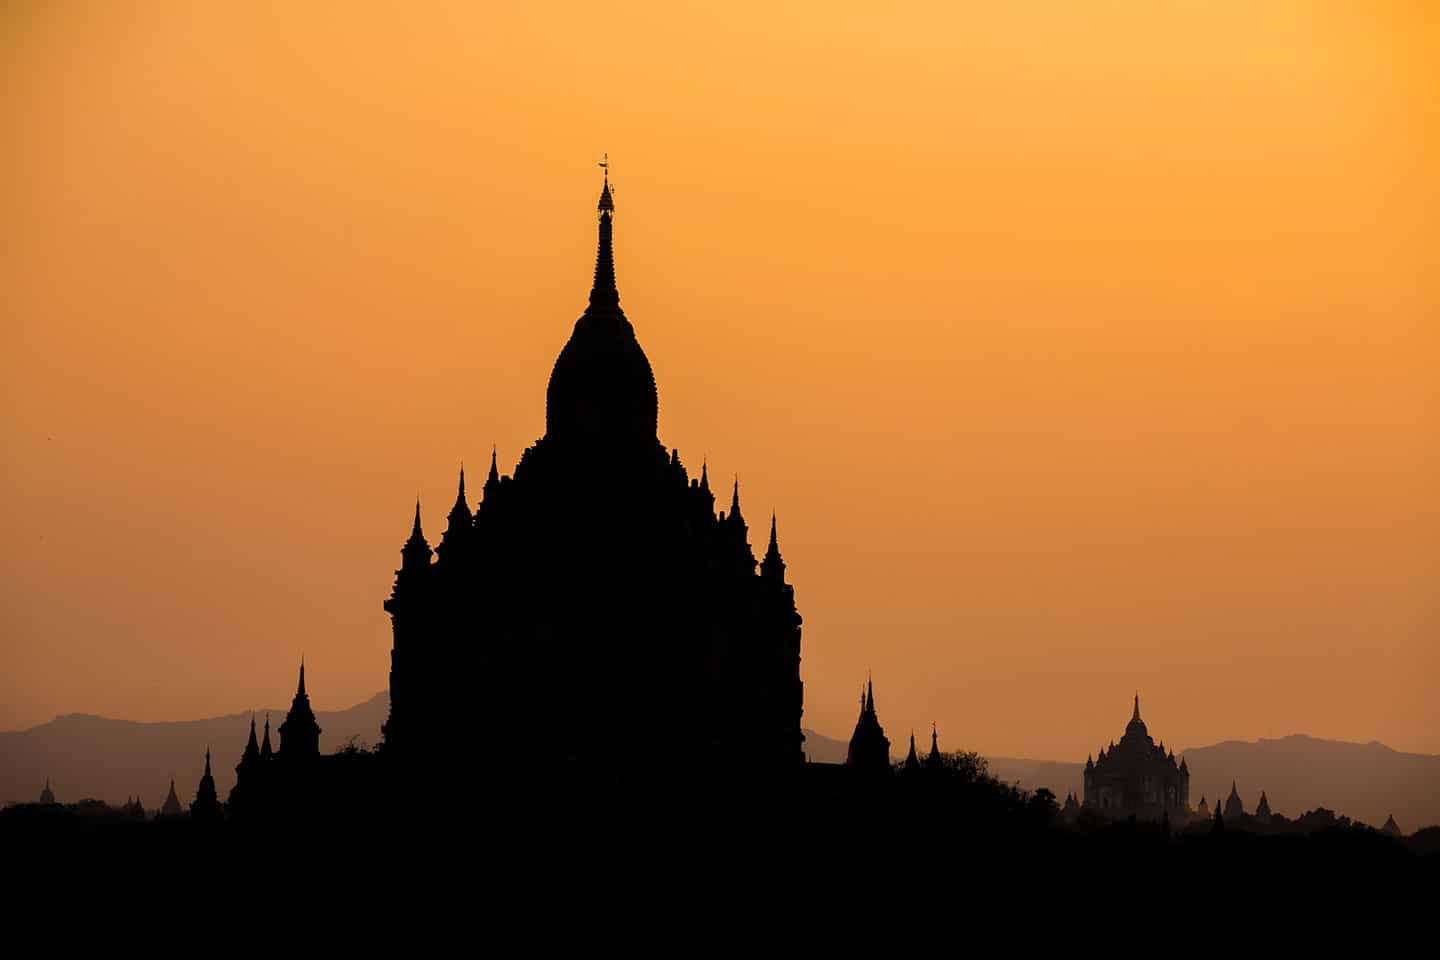 Sunset over a temple in Old Bagan, Myanmar